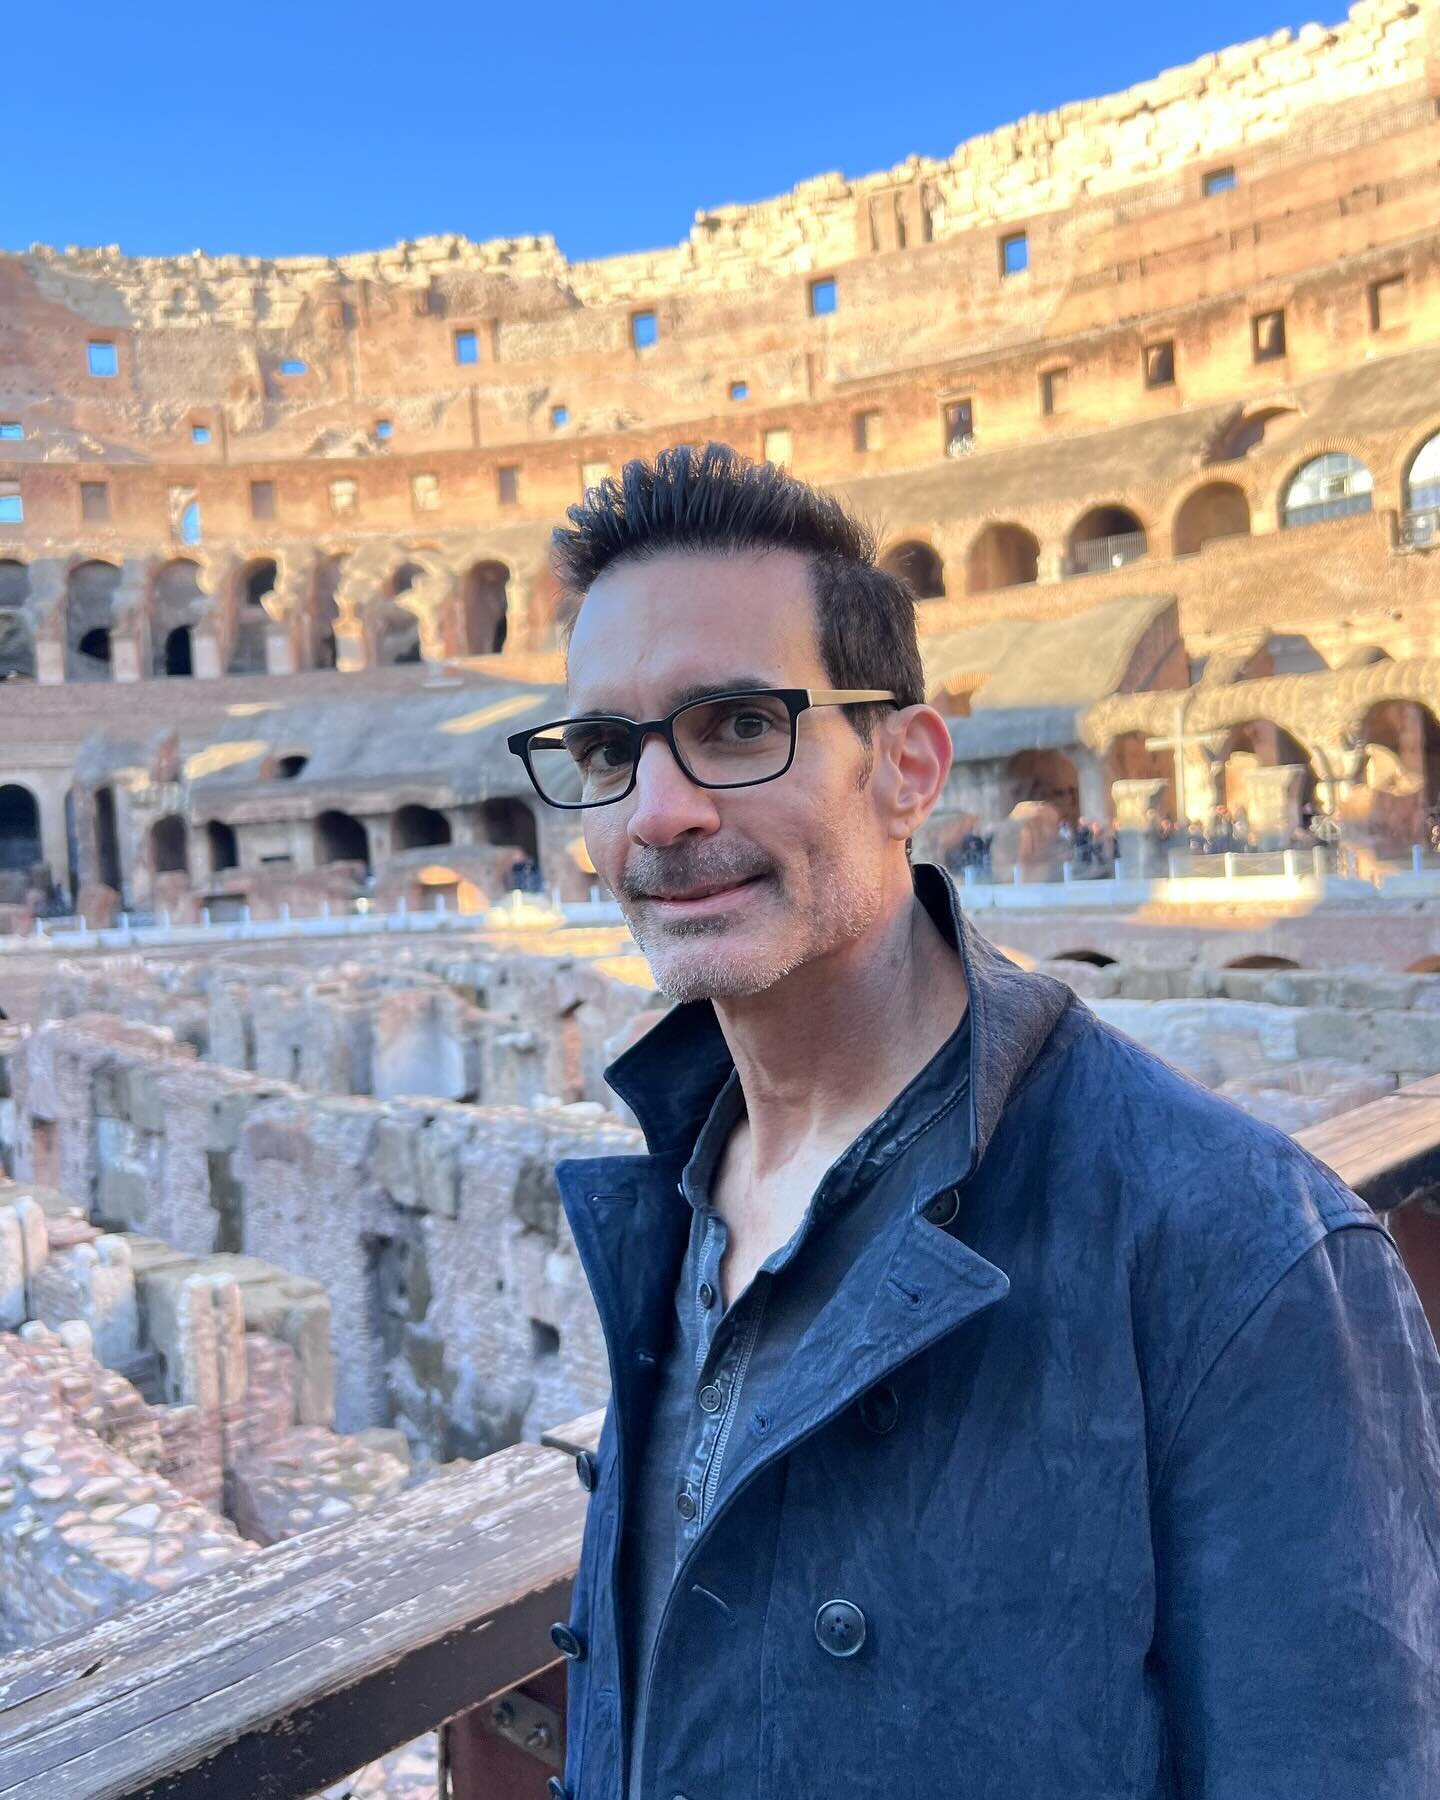 Soaking up the endless beauty, great food and history in Rome and Florence. From the awe-inspiring Colosseum to the stunning art at the Uffizi Gallery in Florence. Every moment here feels like stepping into a living masterpiece. 🇮🇹